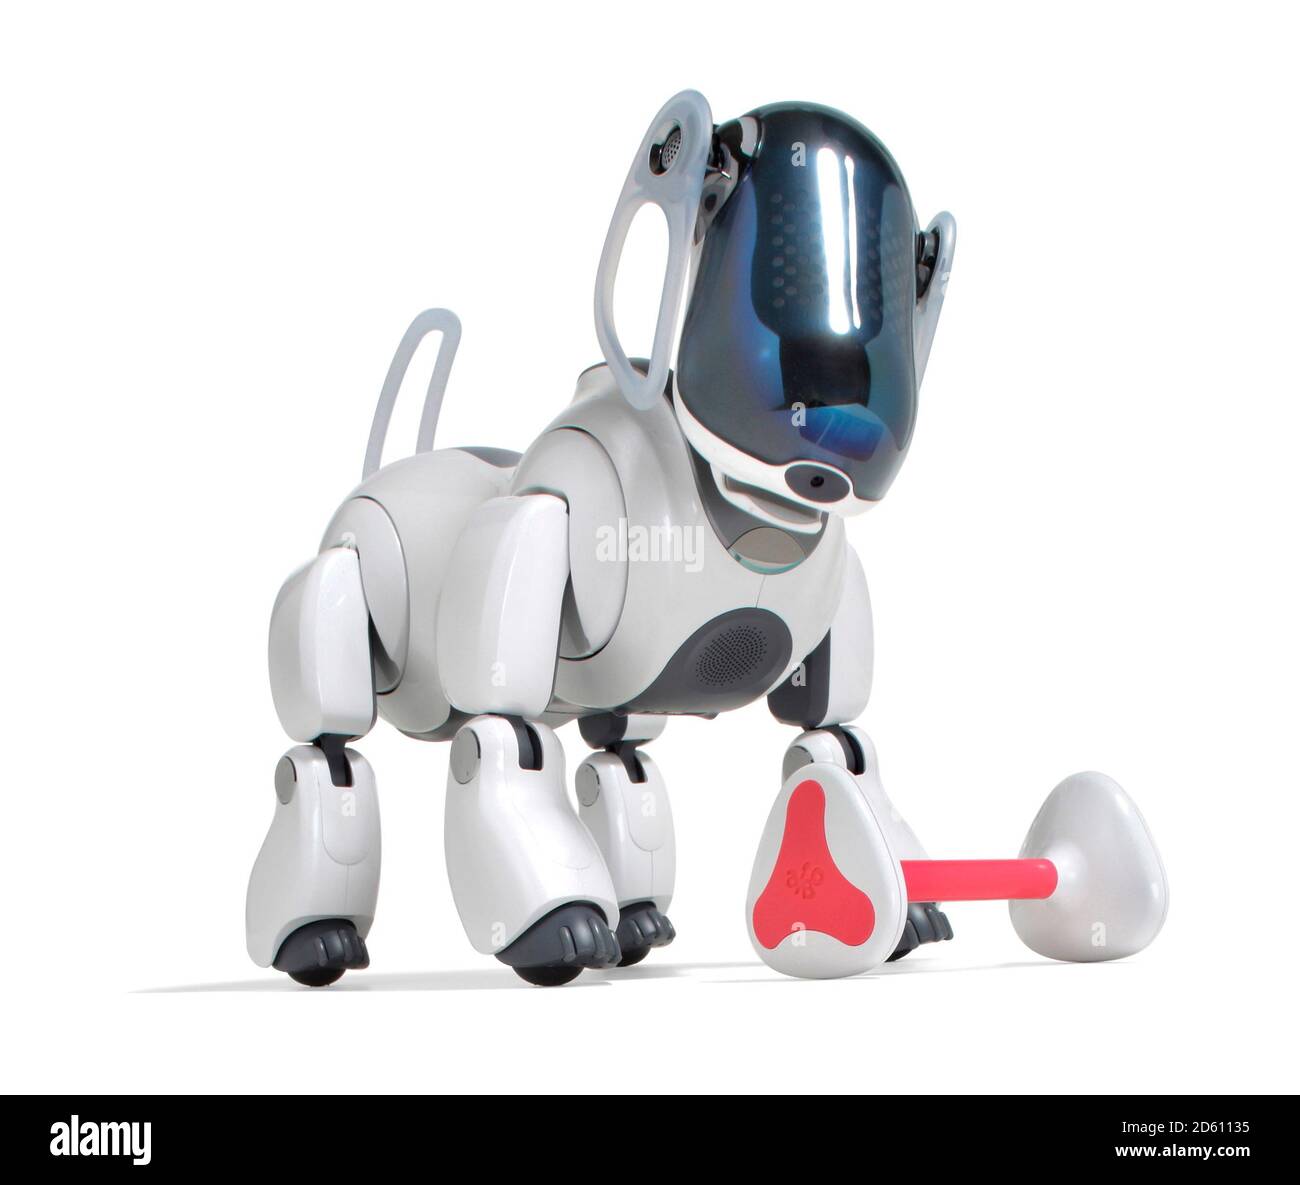 Sony Aibo robotic pet dog in black and white with toy dog bone photographed on a white background. Stock Photo